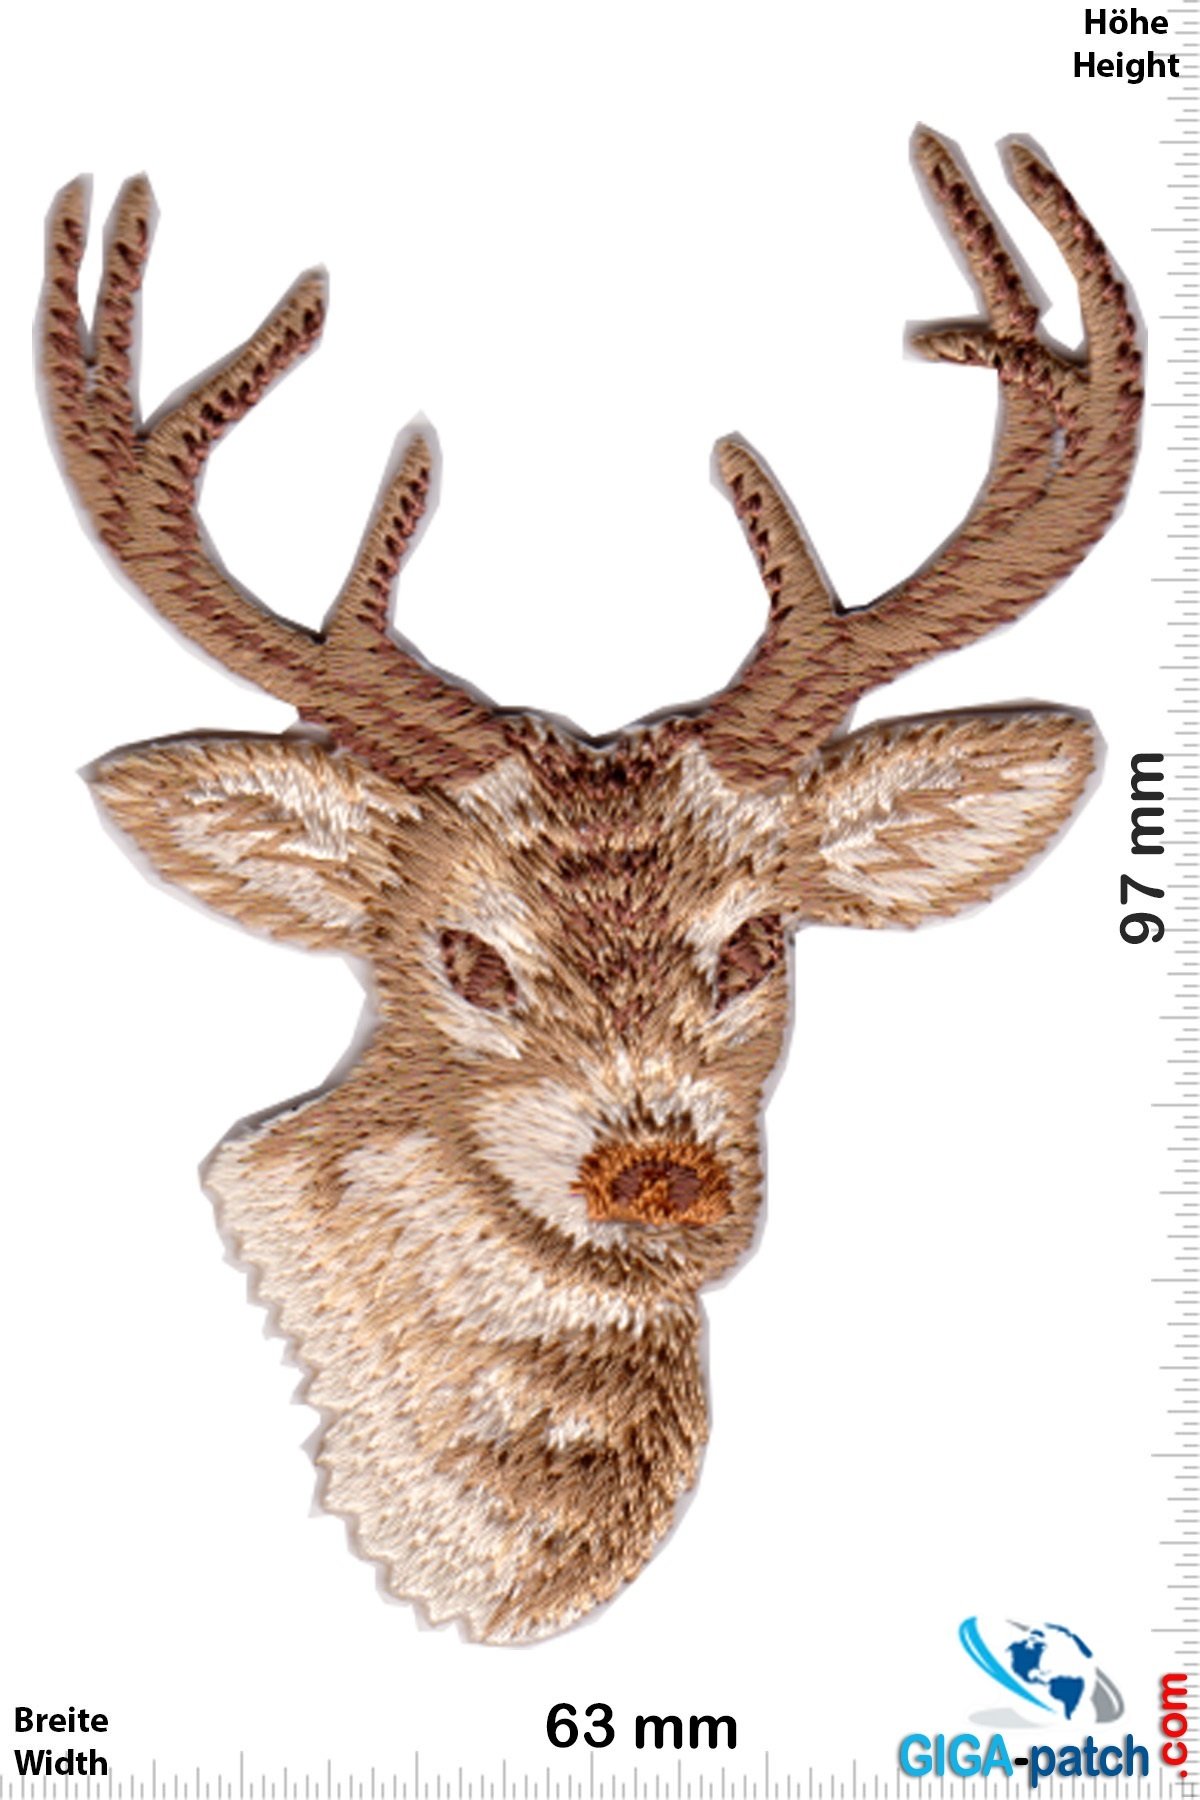 Hisch - Deer - Stag - 8 ender- Patch - Back Patches" - Patch Keychains  Stickers - giga-patch.com - Biggest Patch Shop worldwide